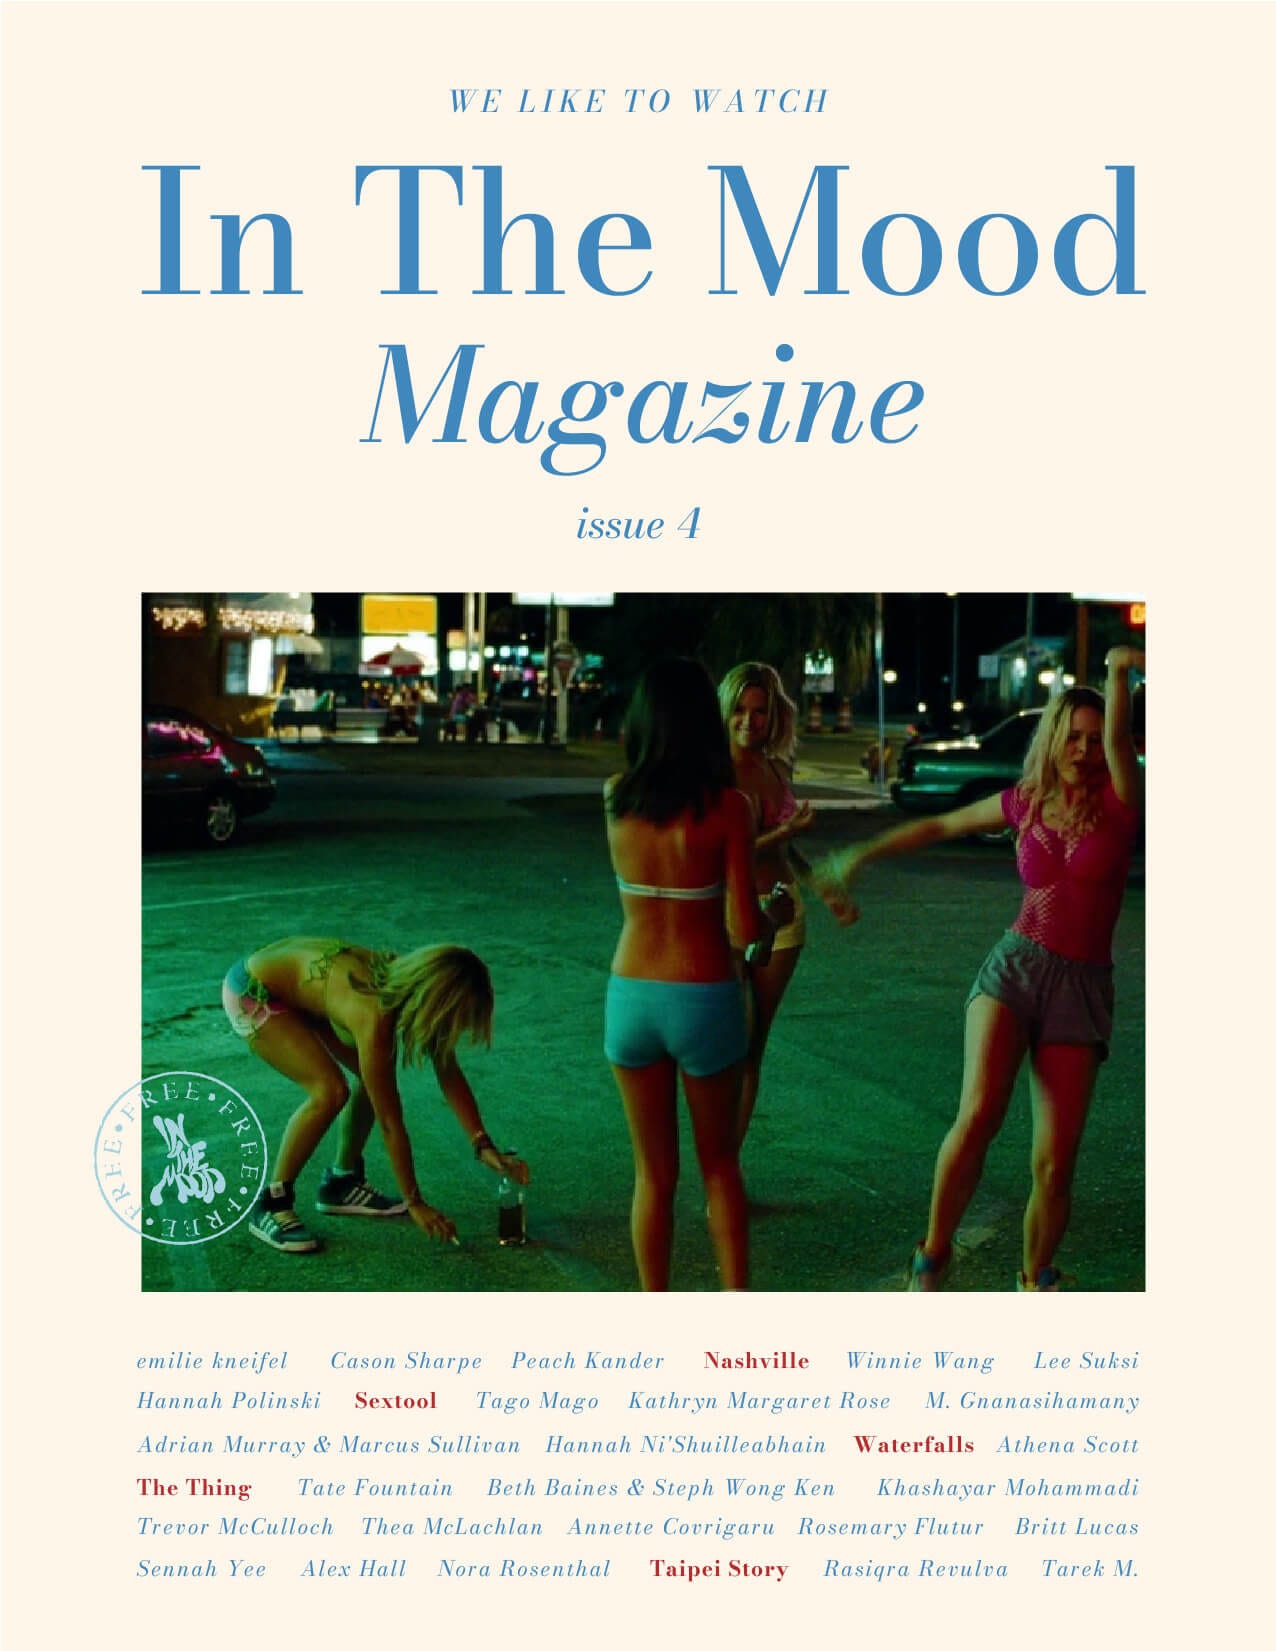 A French movie style cover that reads "In the Mood Magazine - Issue 4". In the center is a film still from Spring Breakers, of 4 young girls in a parking lot dancing at night.